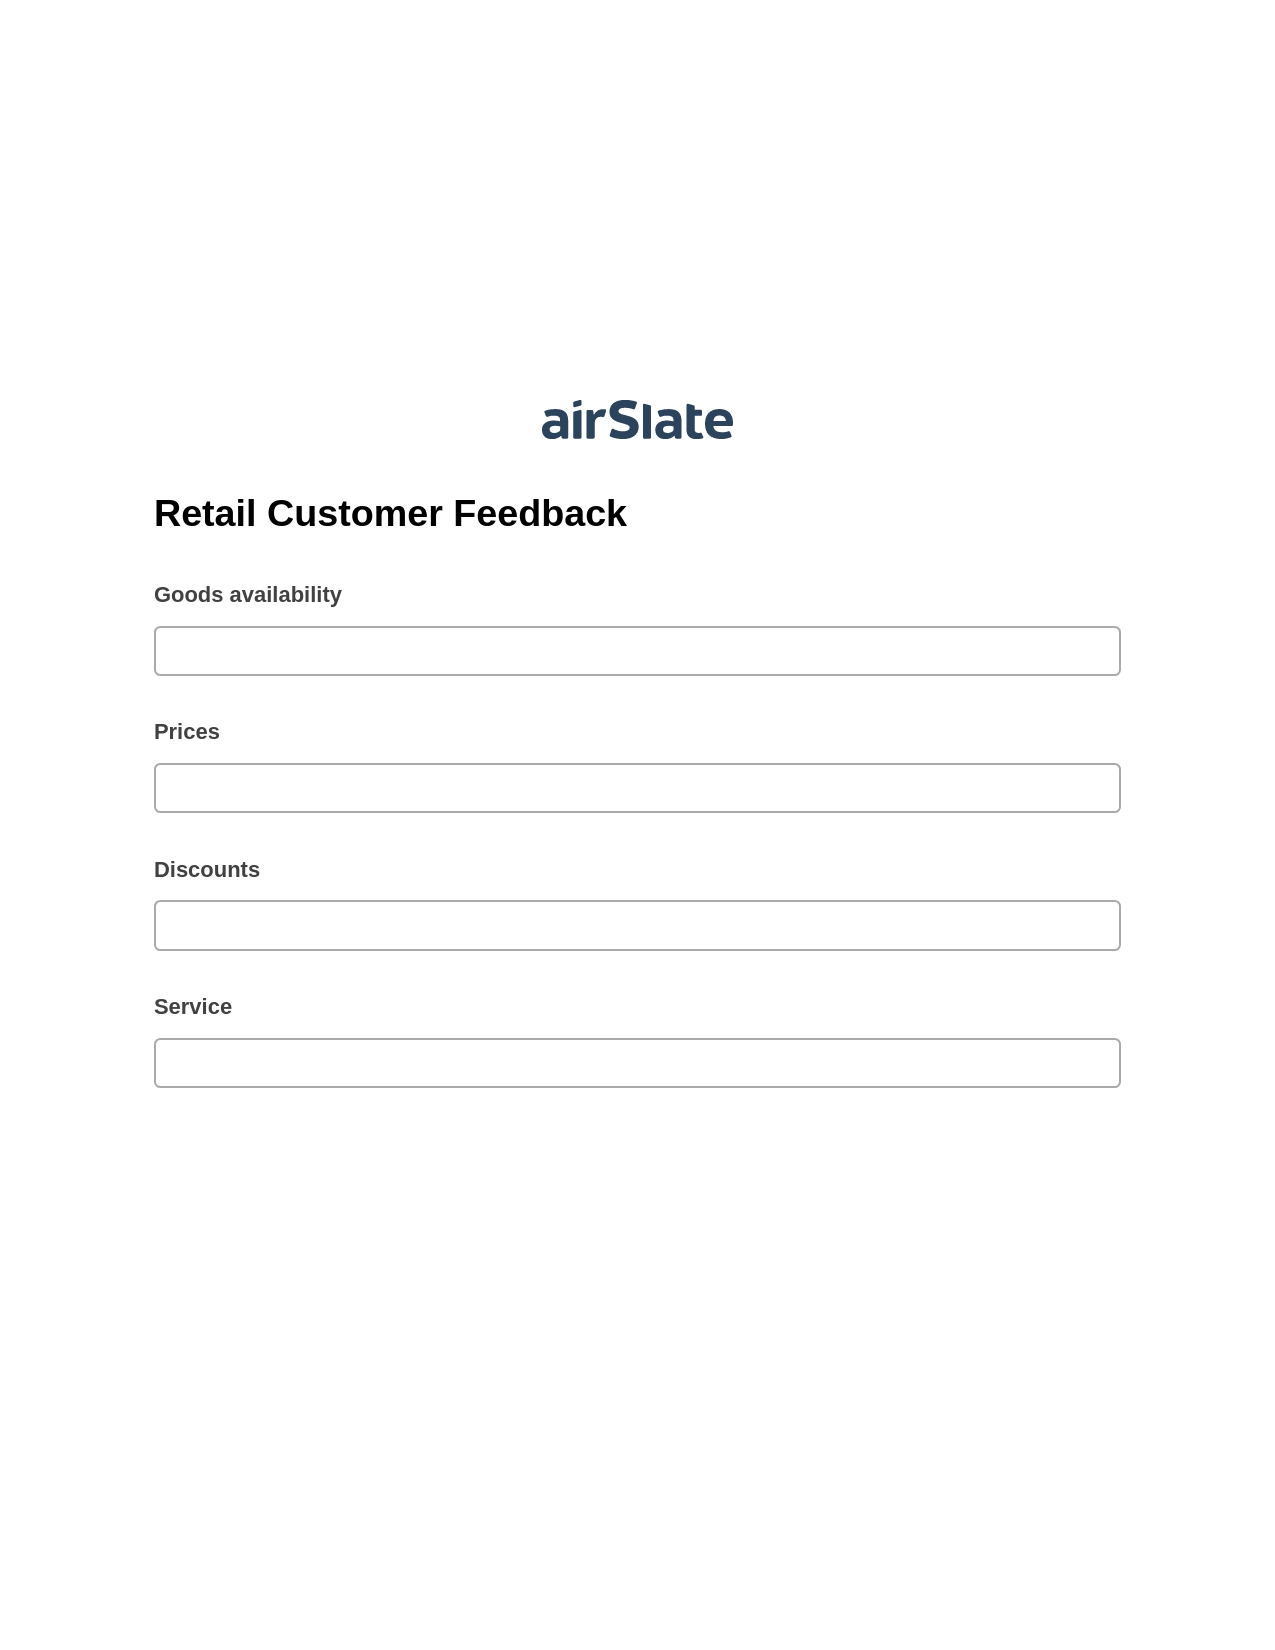 Retail Customer Feedback Pre-fill Dropdowns from Excel Bot, Assign Slate Name Bot, Export to Excel 365 Bot